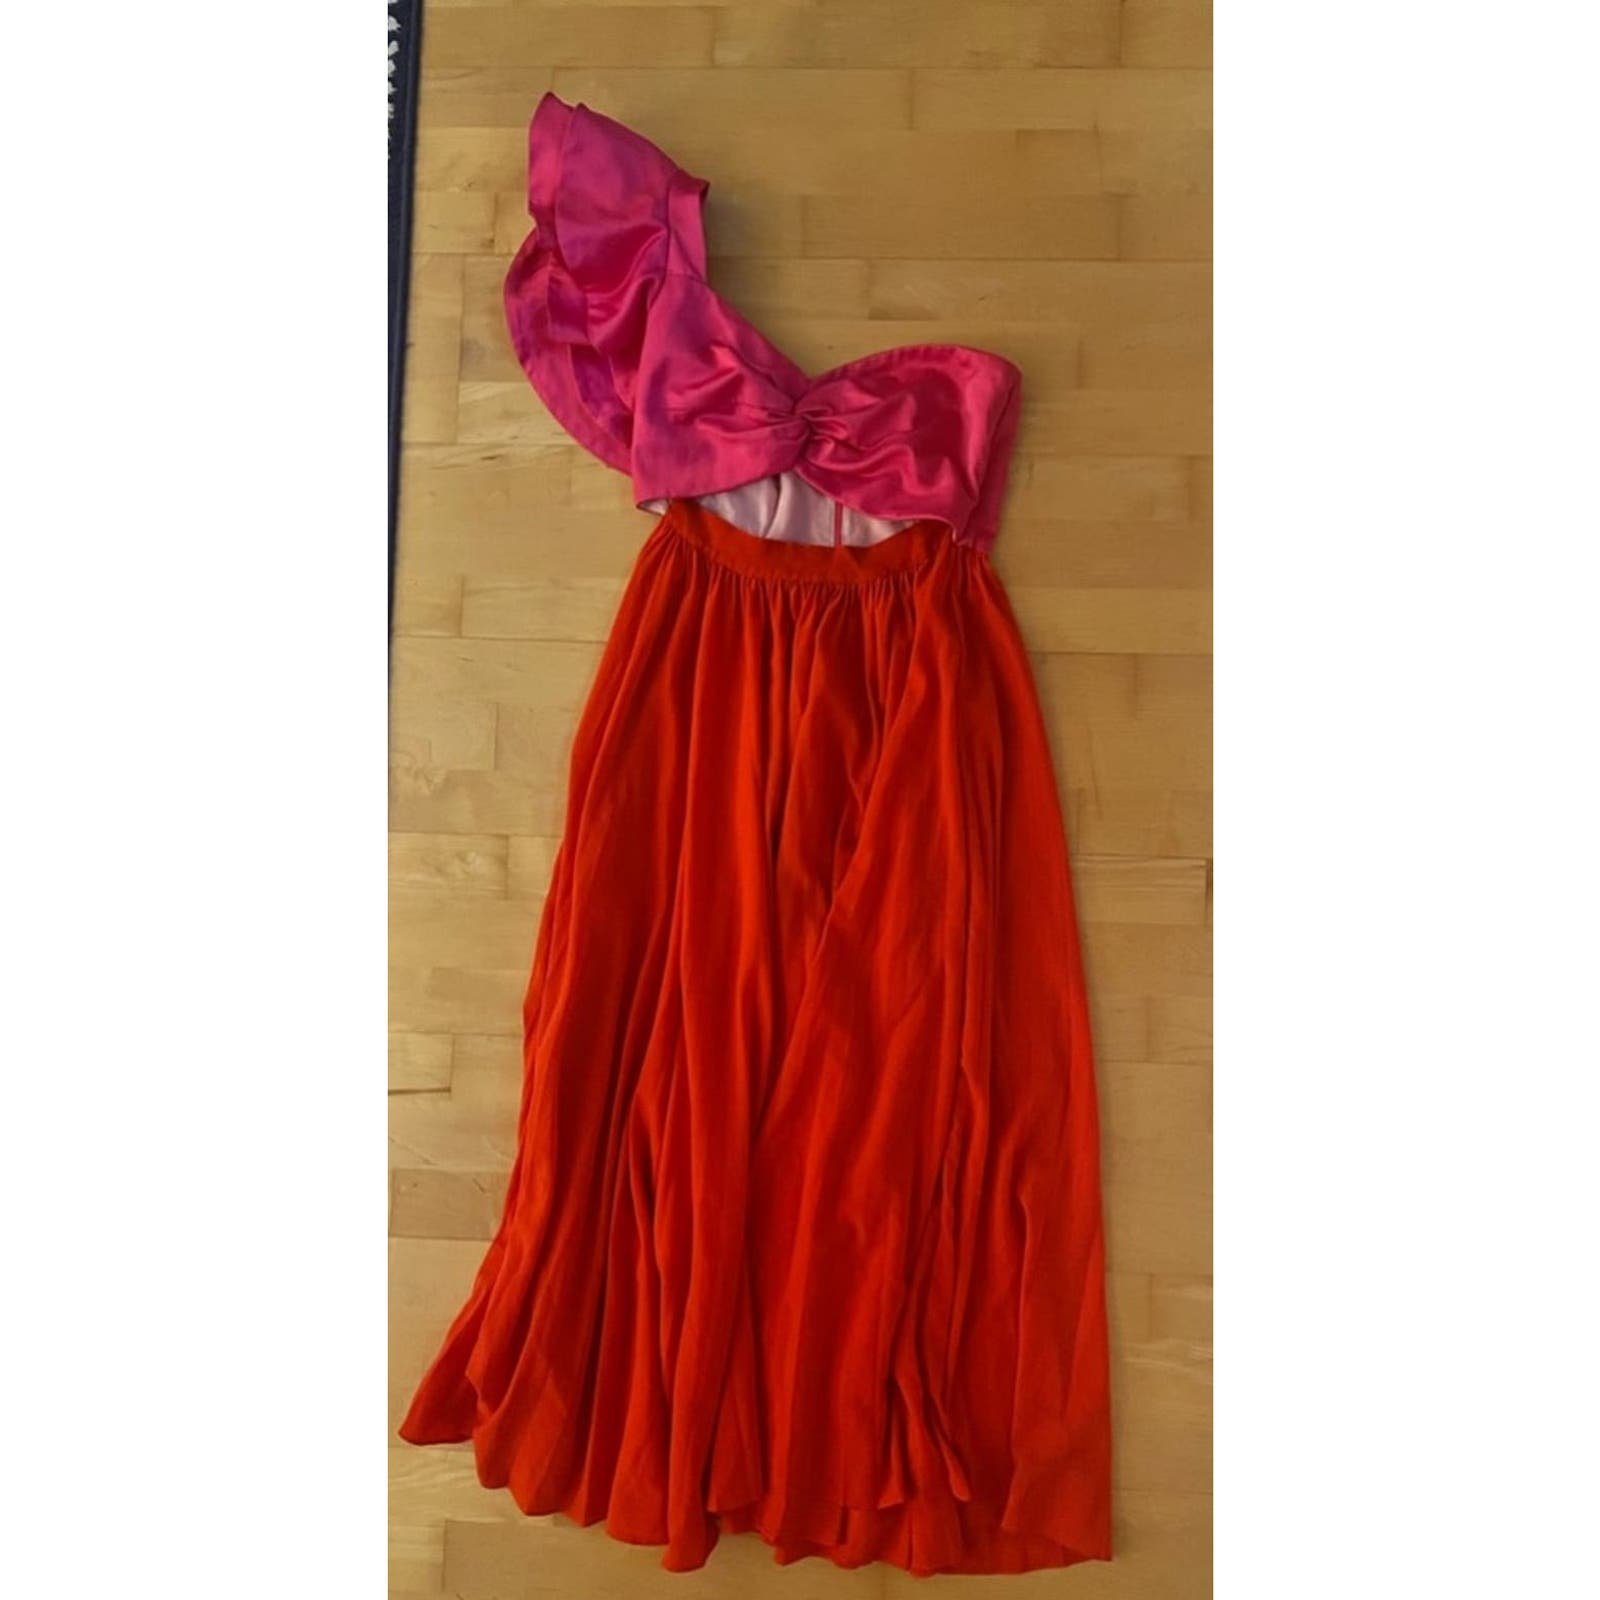 Personality AMUR Cleopatra Pleated Dress red pink one shoulder bow pleated midi dress size 6 PMakAKmGj Factory Price